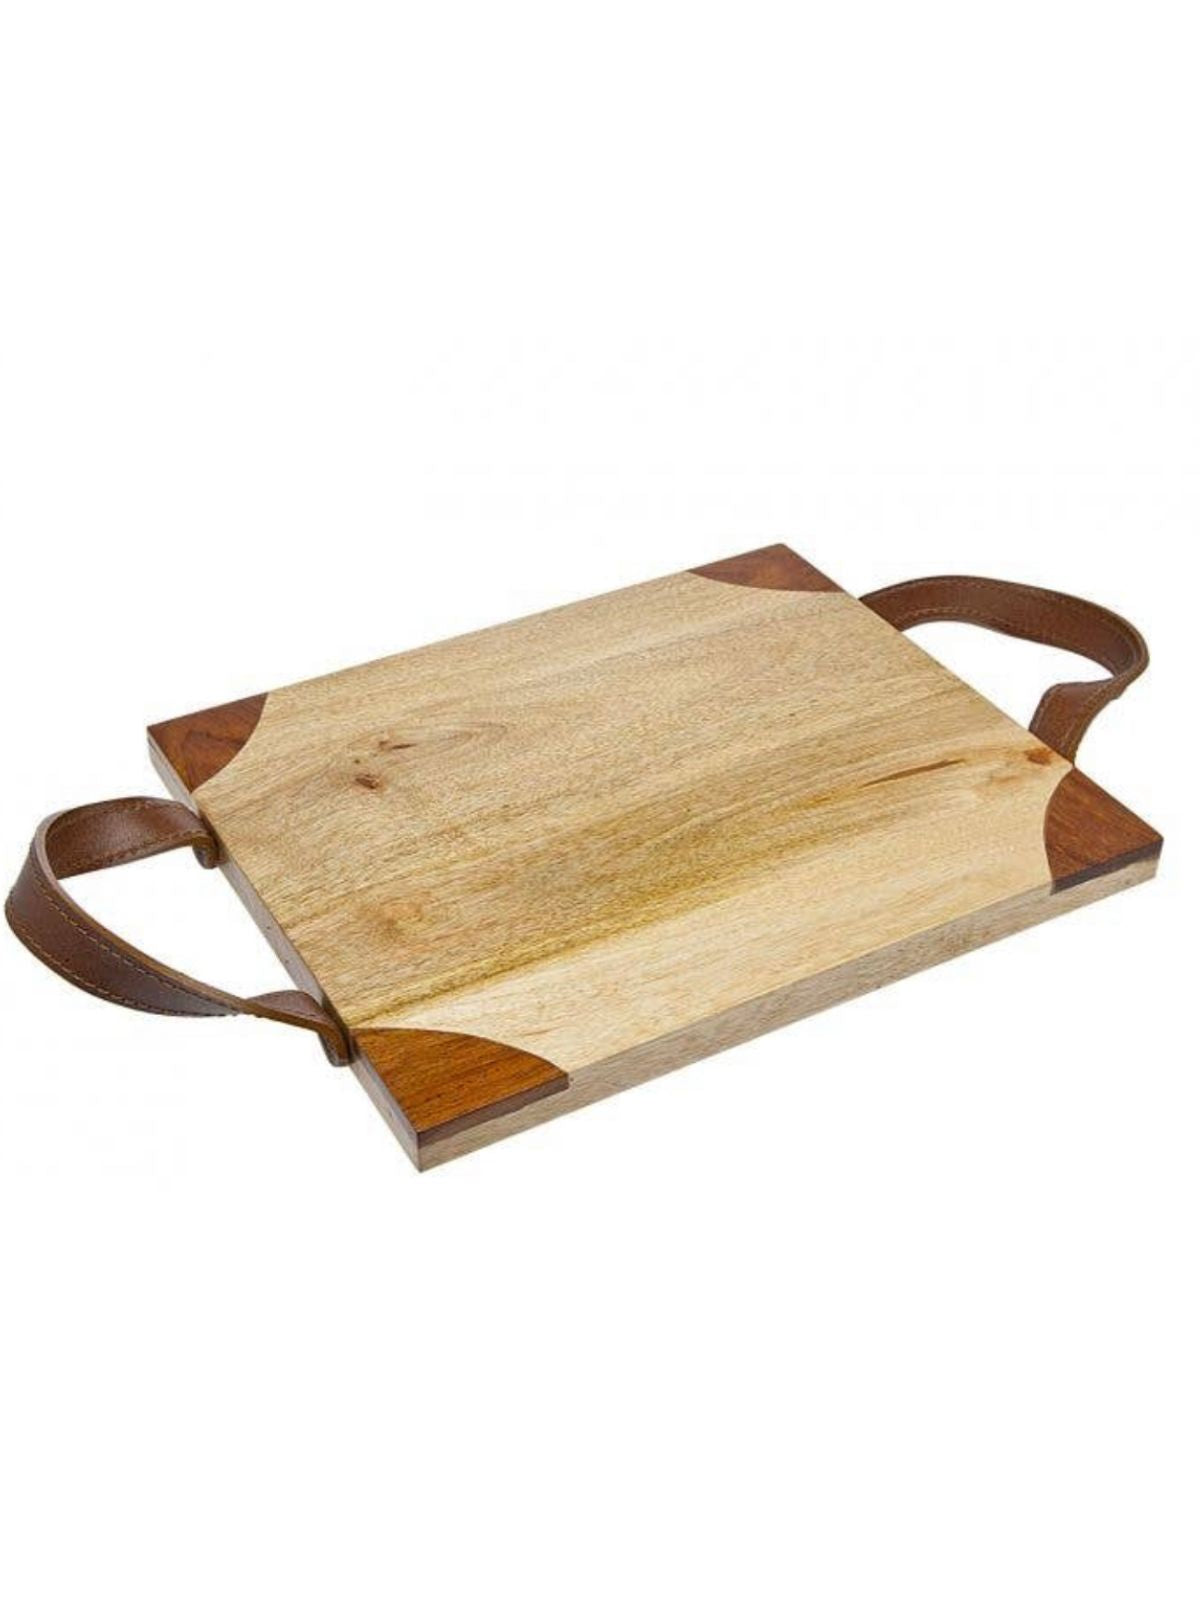 Wood Serving Tray with Leather Handles, 14D.